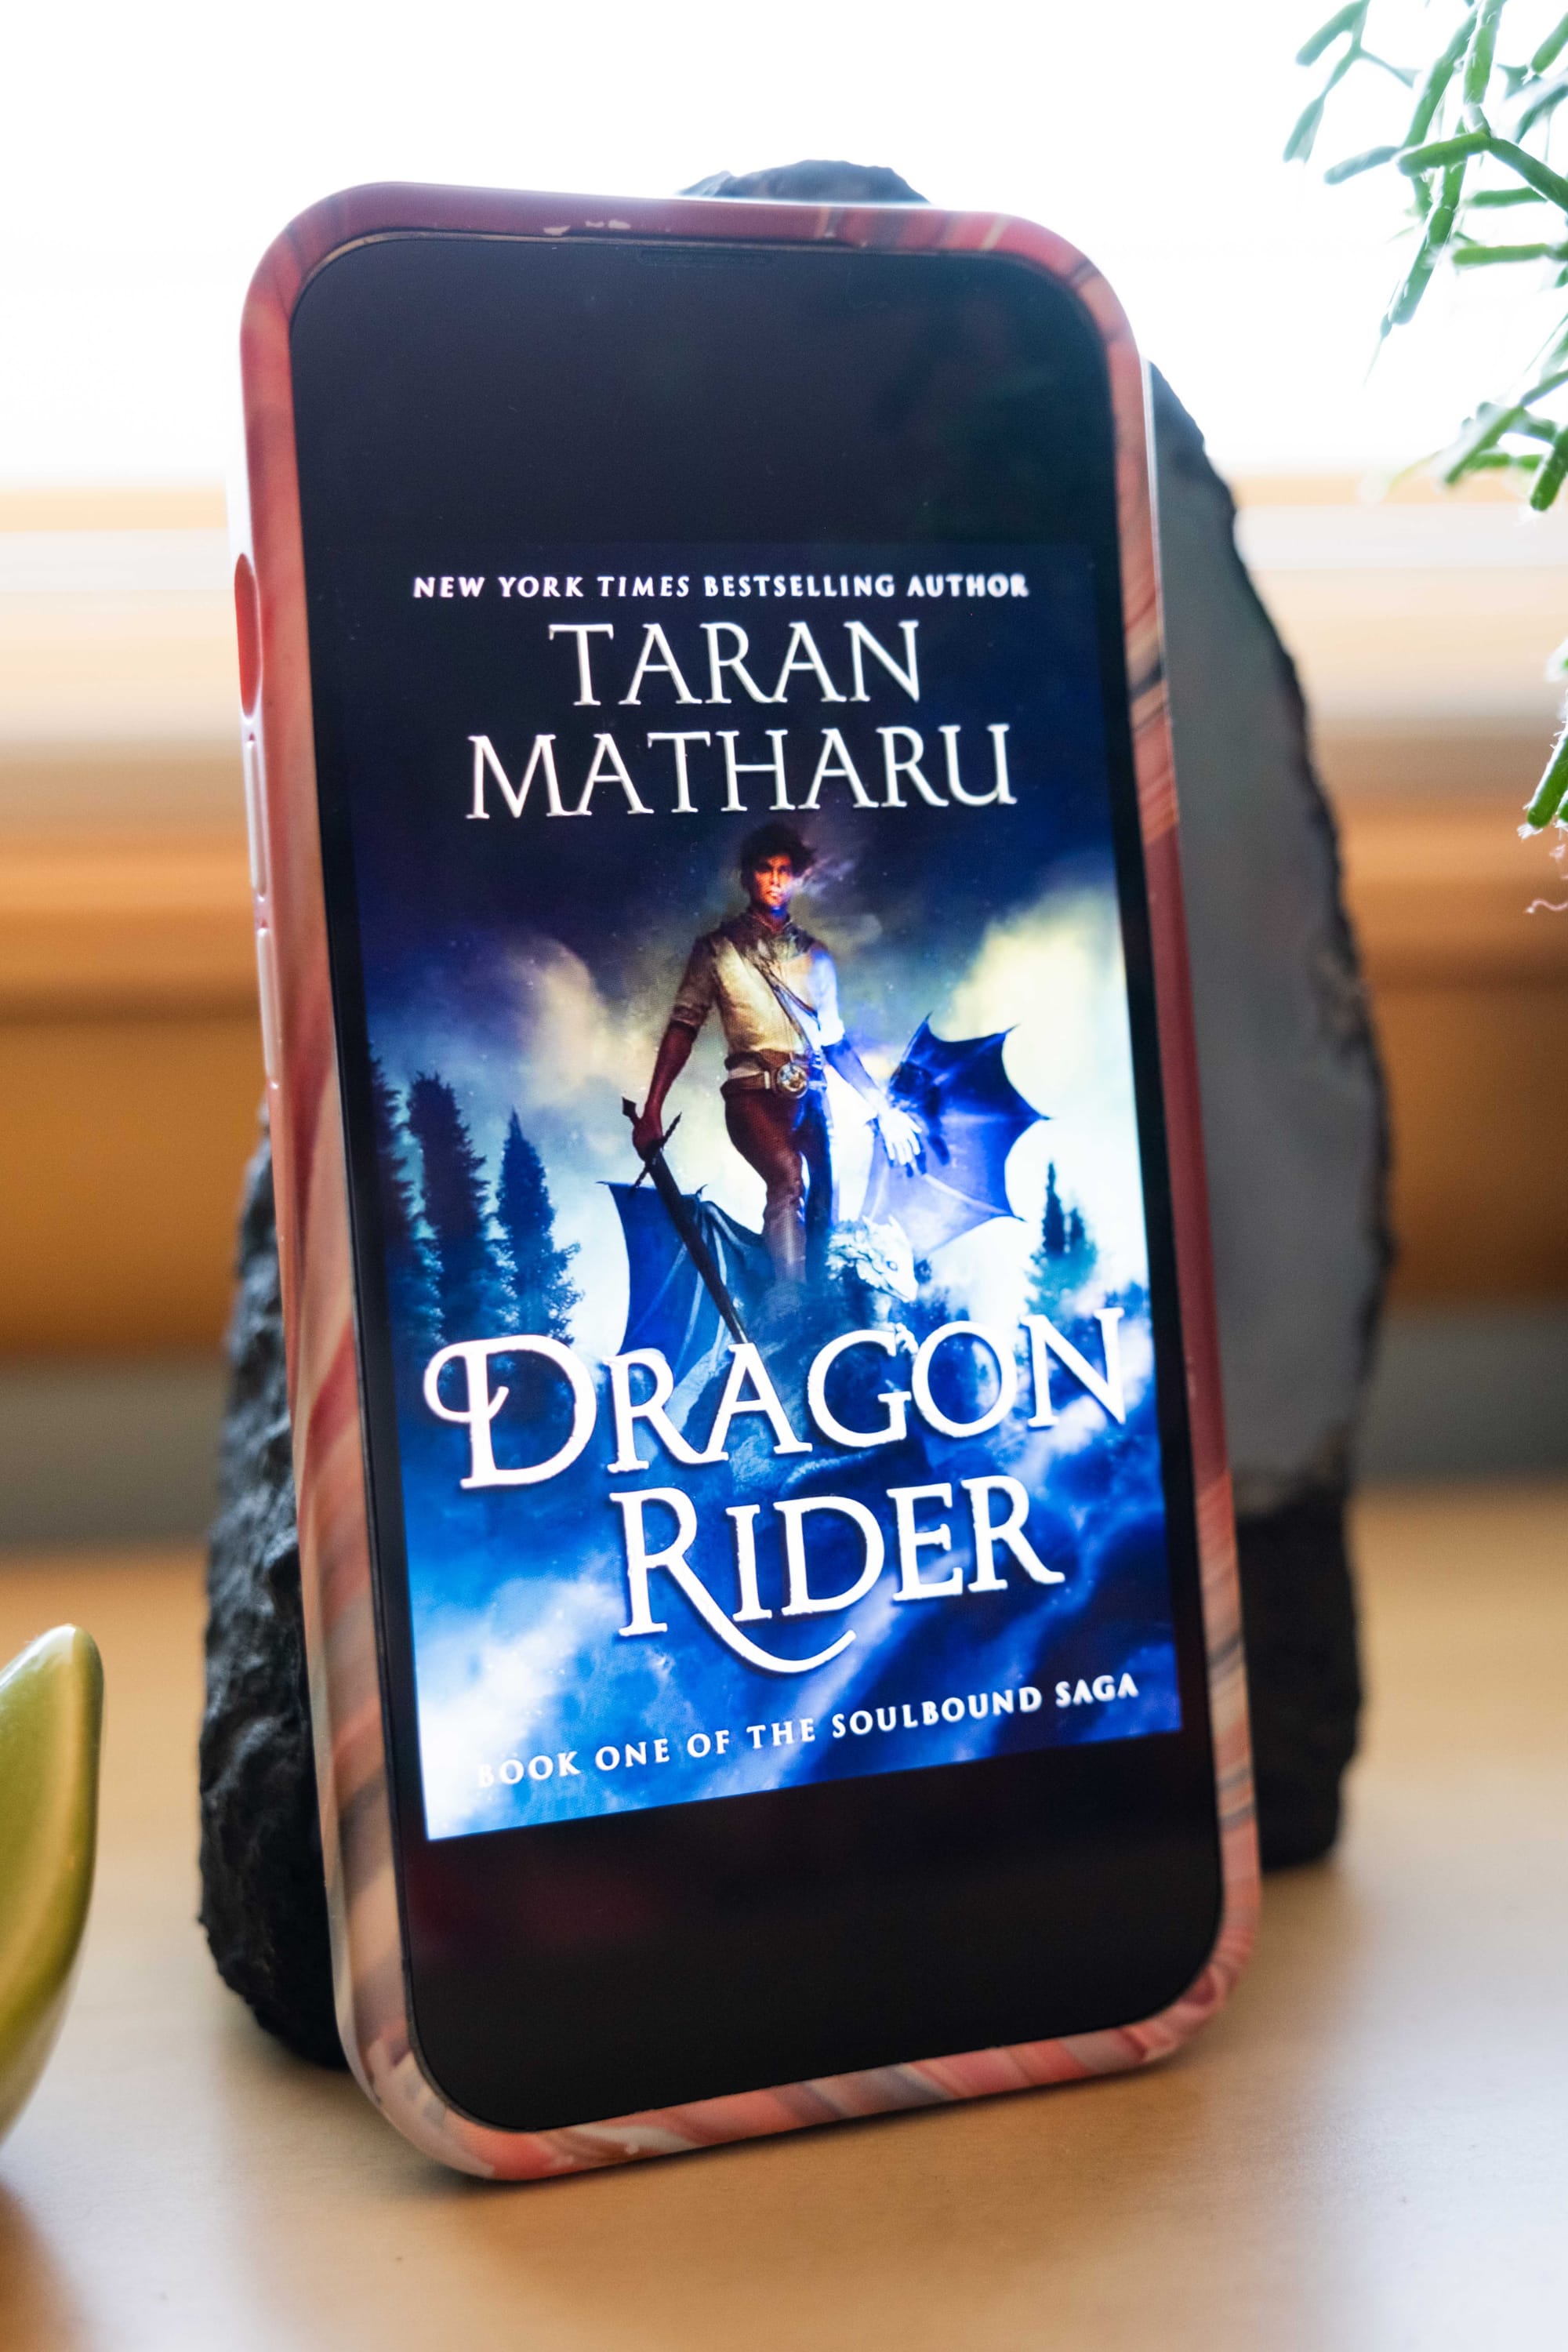 Book cover for Dragon Rider by Taran Matharu on an iPhone